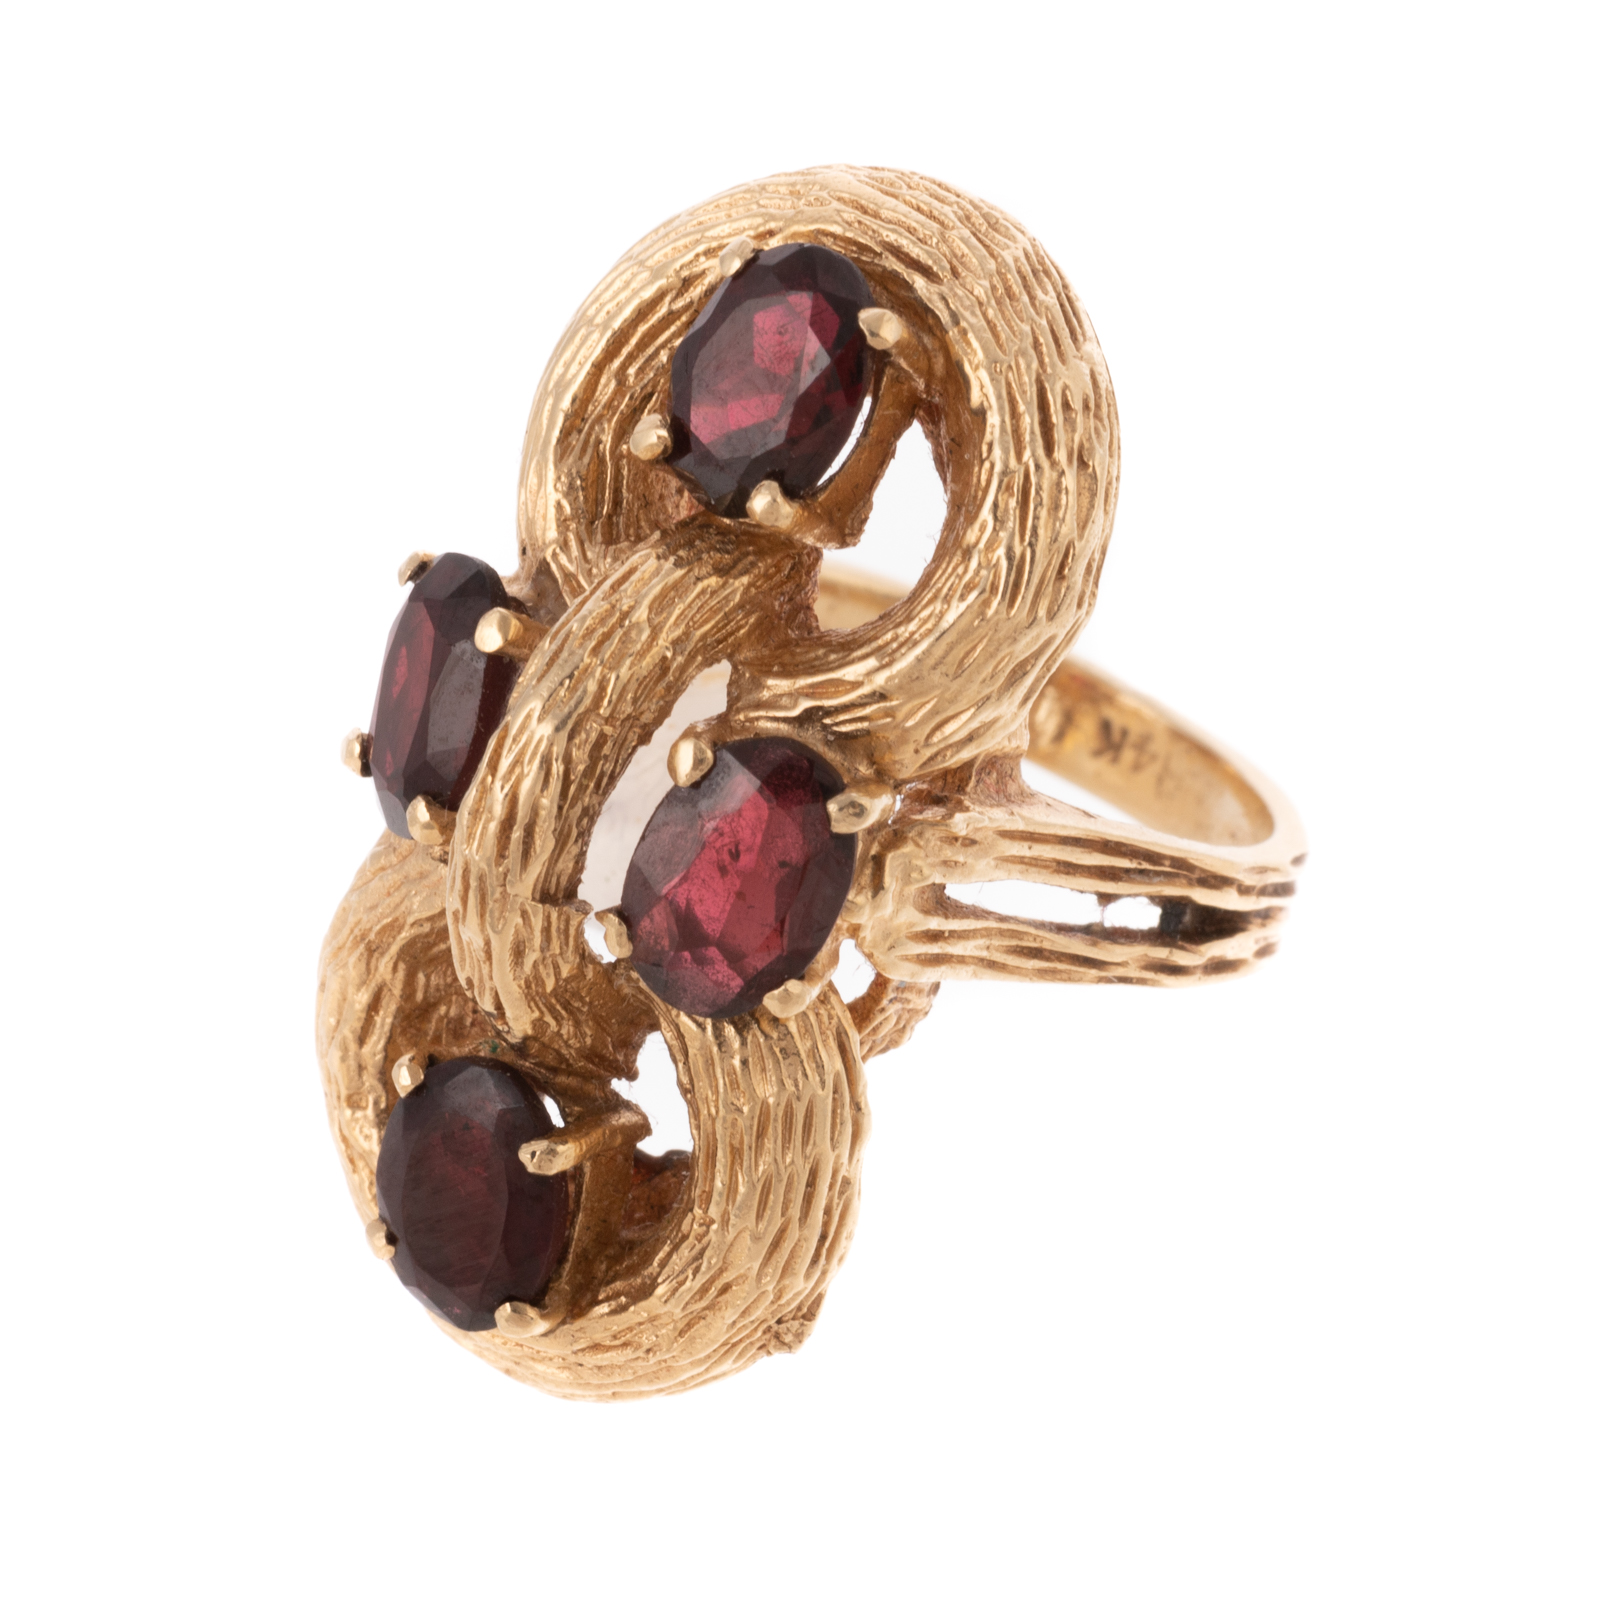 A TEXTURED KNOT RING WITH GARNETS 2e8f5c